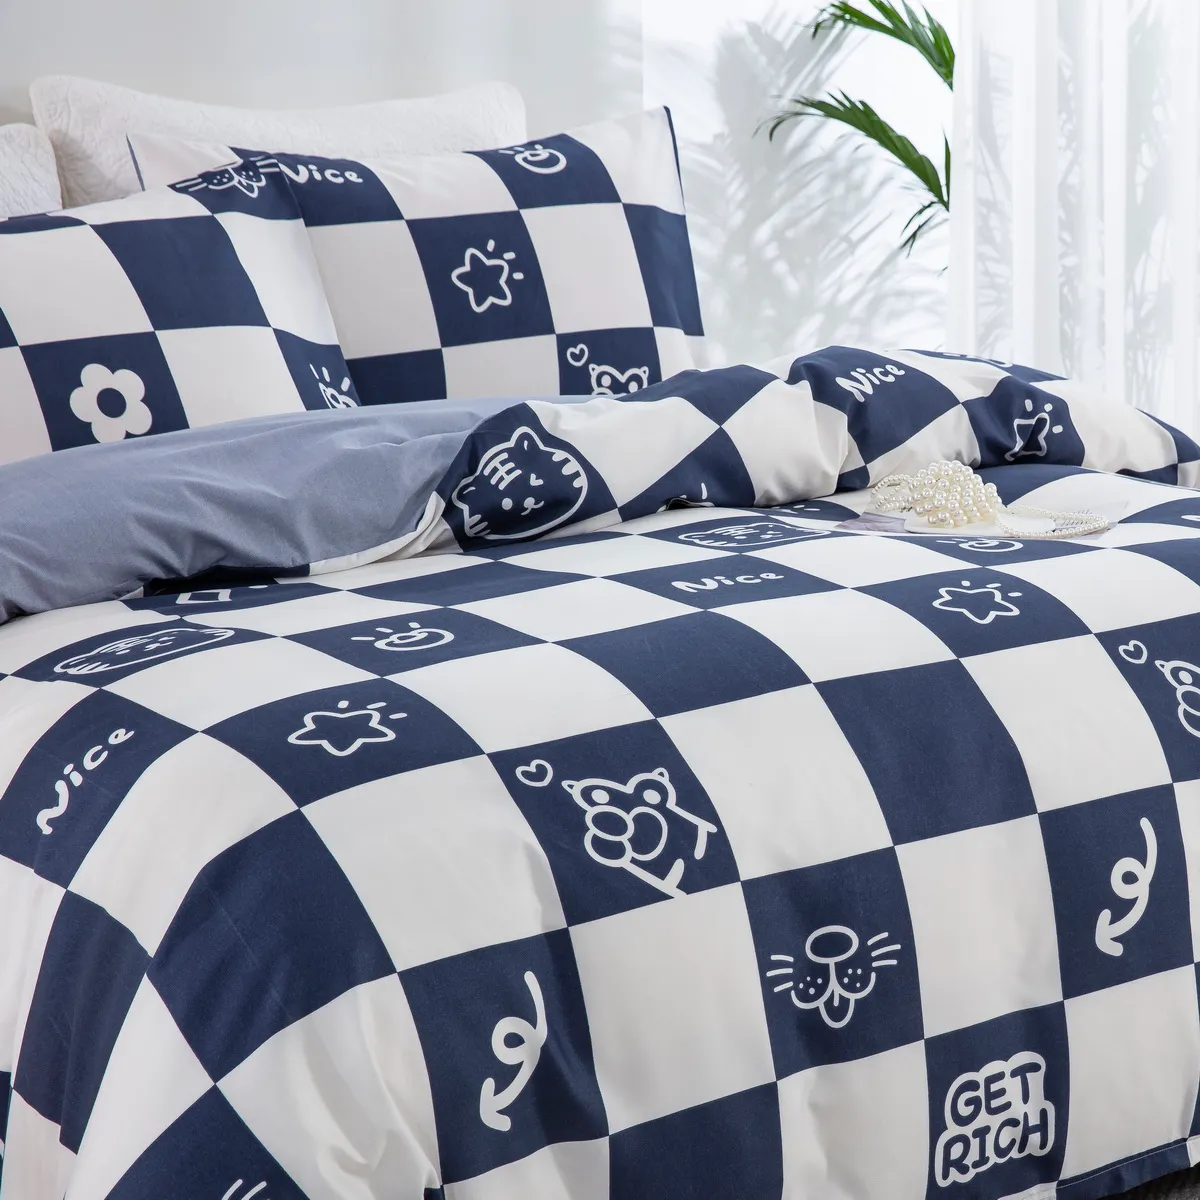 2/3pcs Modern and Minimalist Cartoon Geometric Pattern Bedding Set,Includes Duvet Cover and Pillowcases BLUEWHITE big image 1